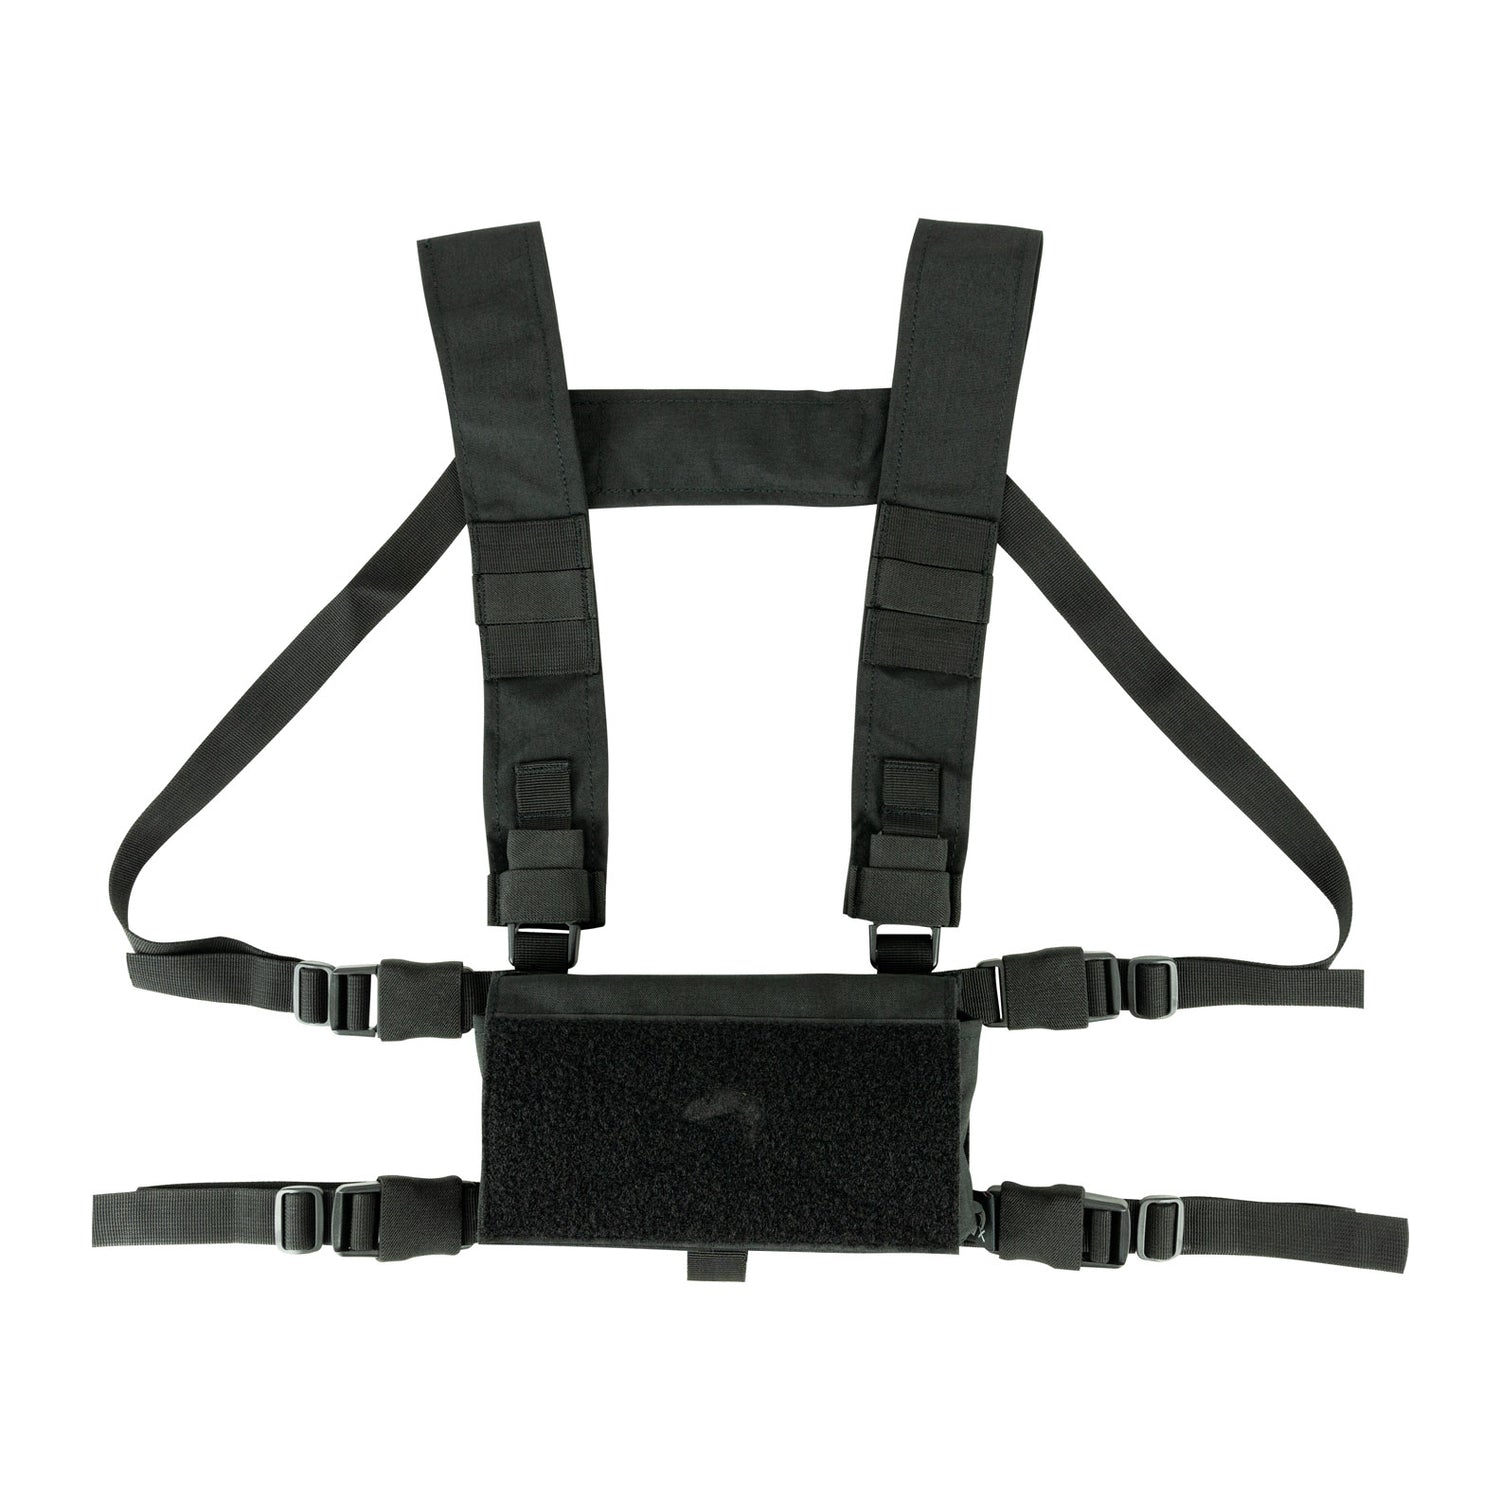 Viper-VX-Buckle-Up-Utility-Rig